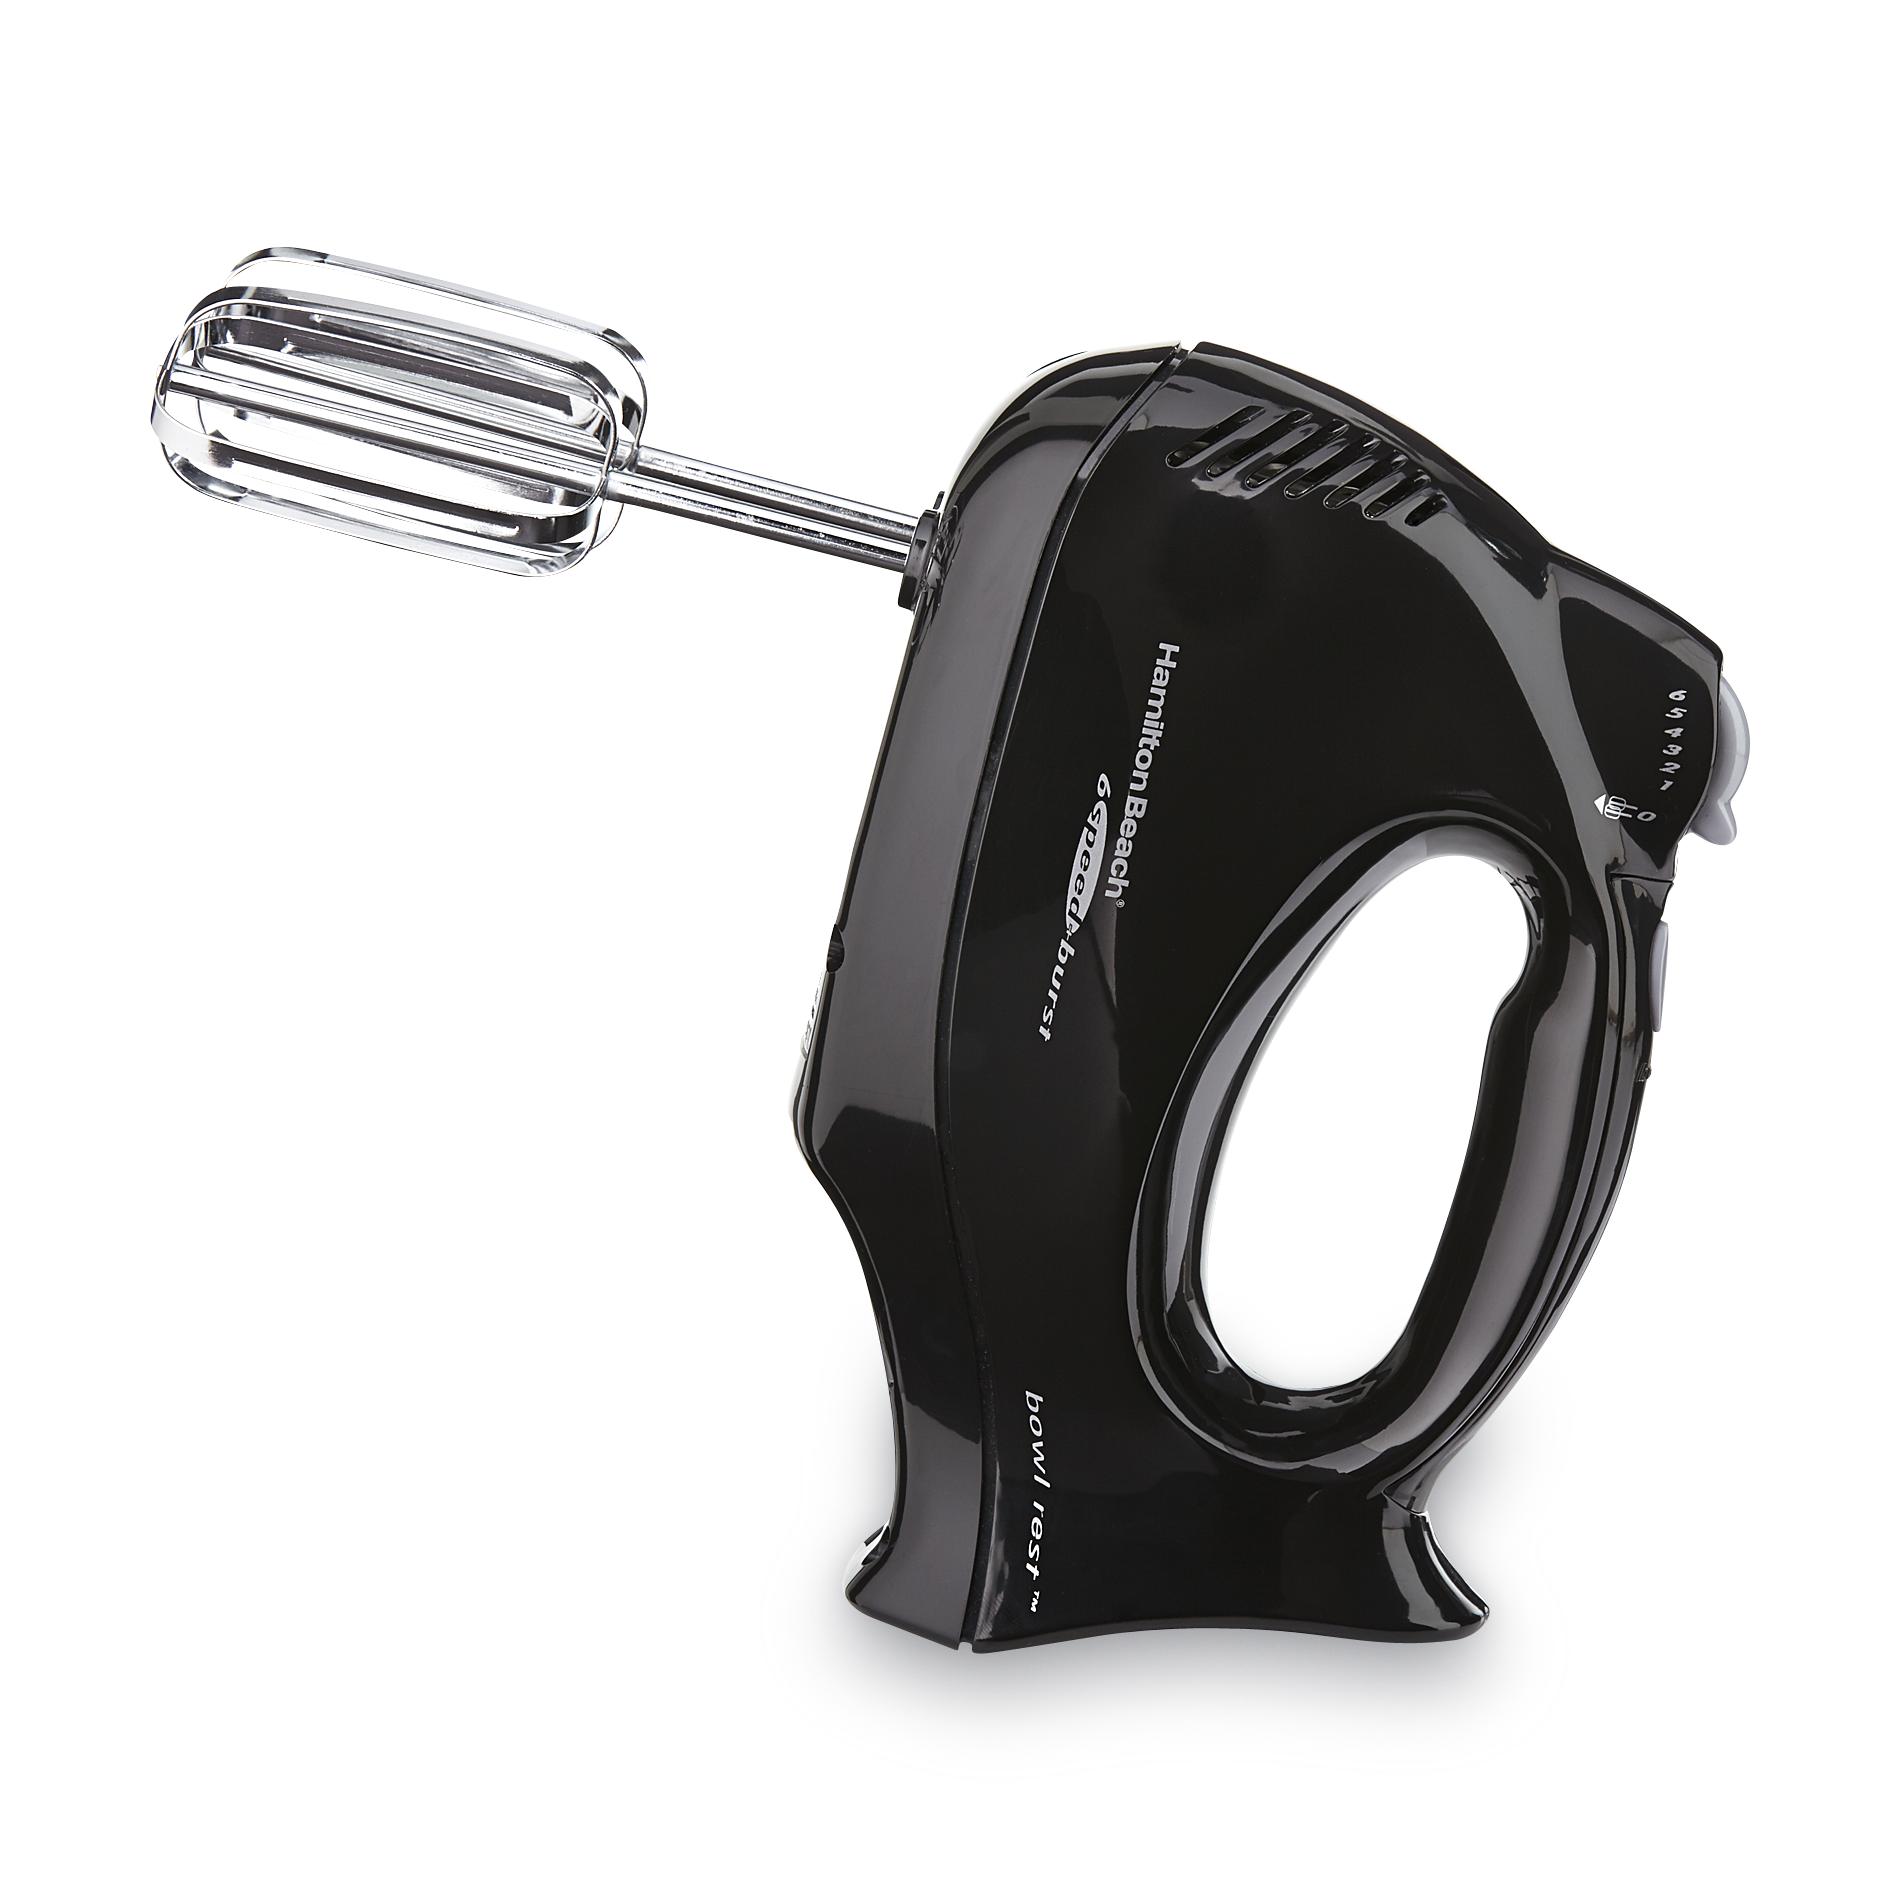 Hand Mixer with Case - Black - 62692